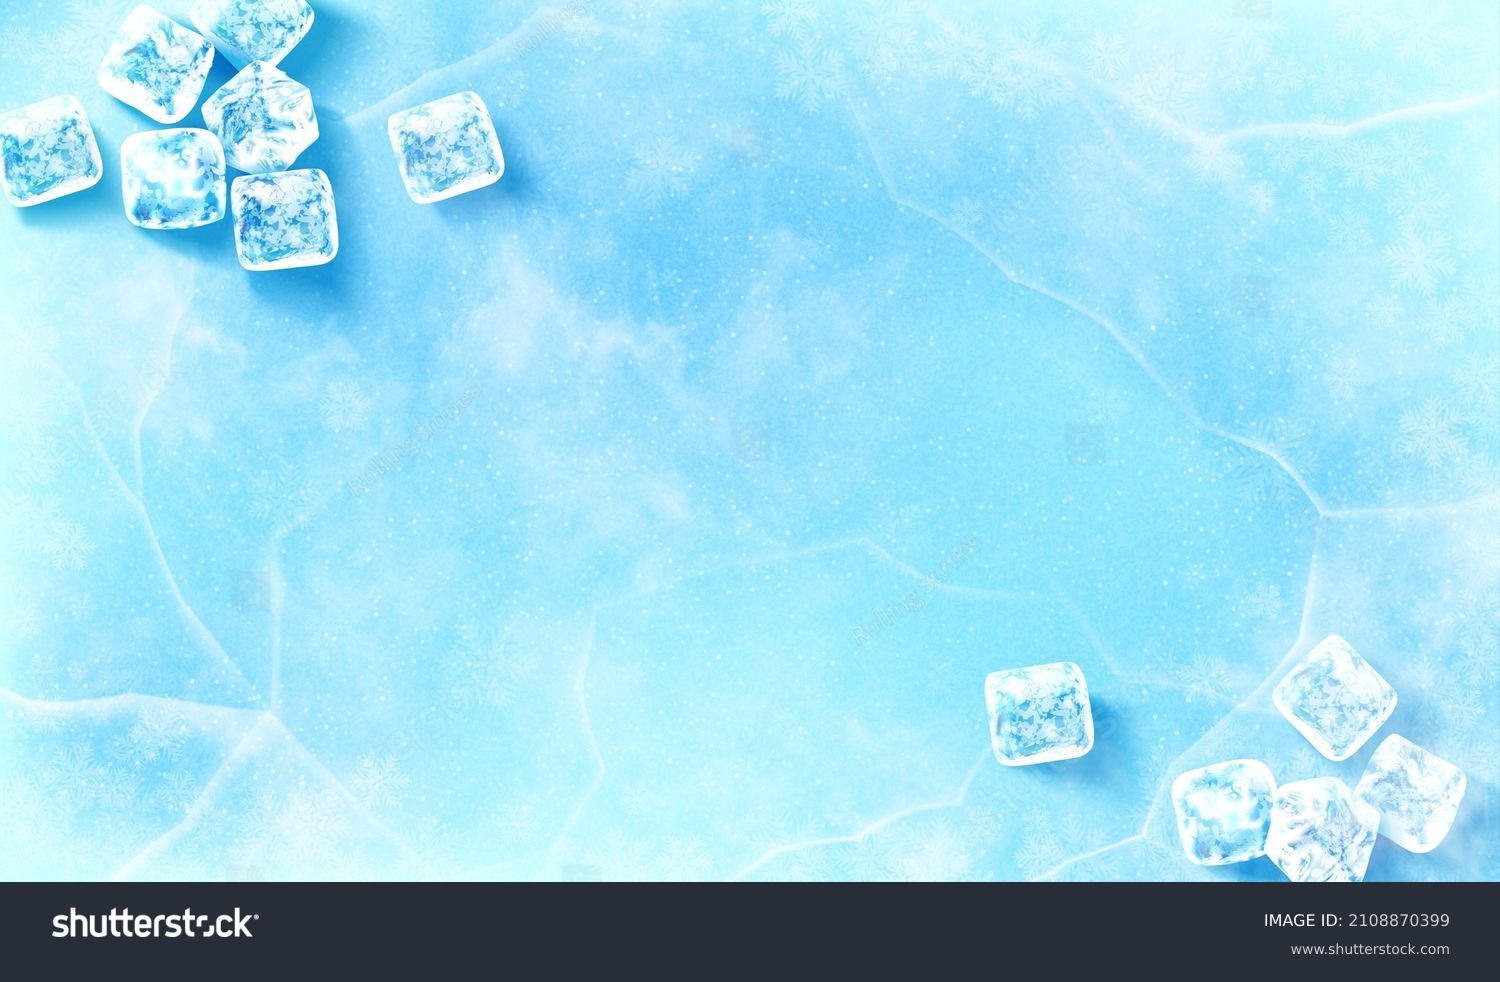 Icy surface background. 3D Illustration of groups of ice cubes scattered on upper left and bottom right of light blue surface covered in ice Stockvektor